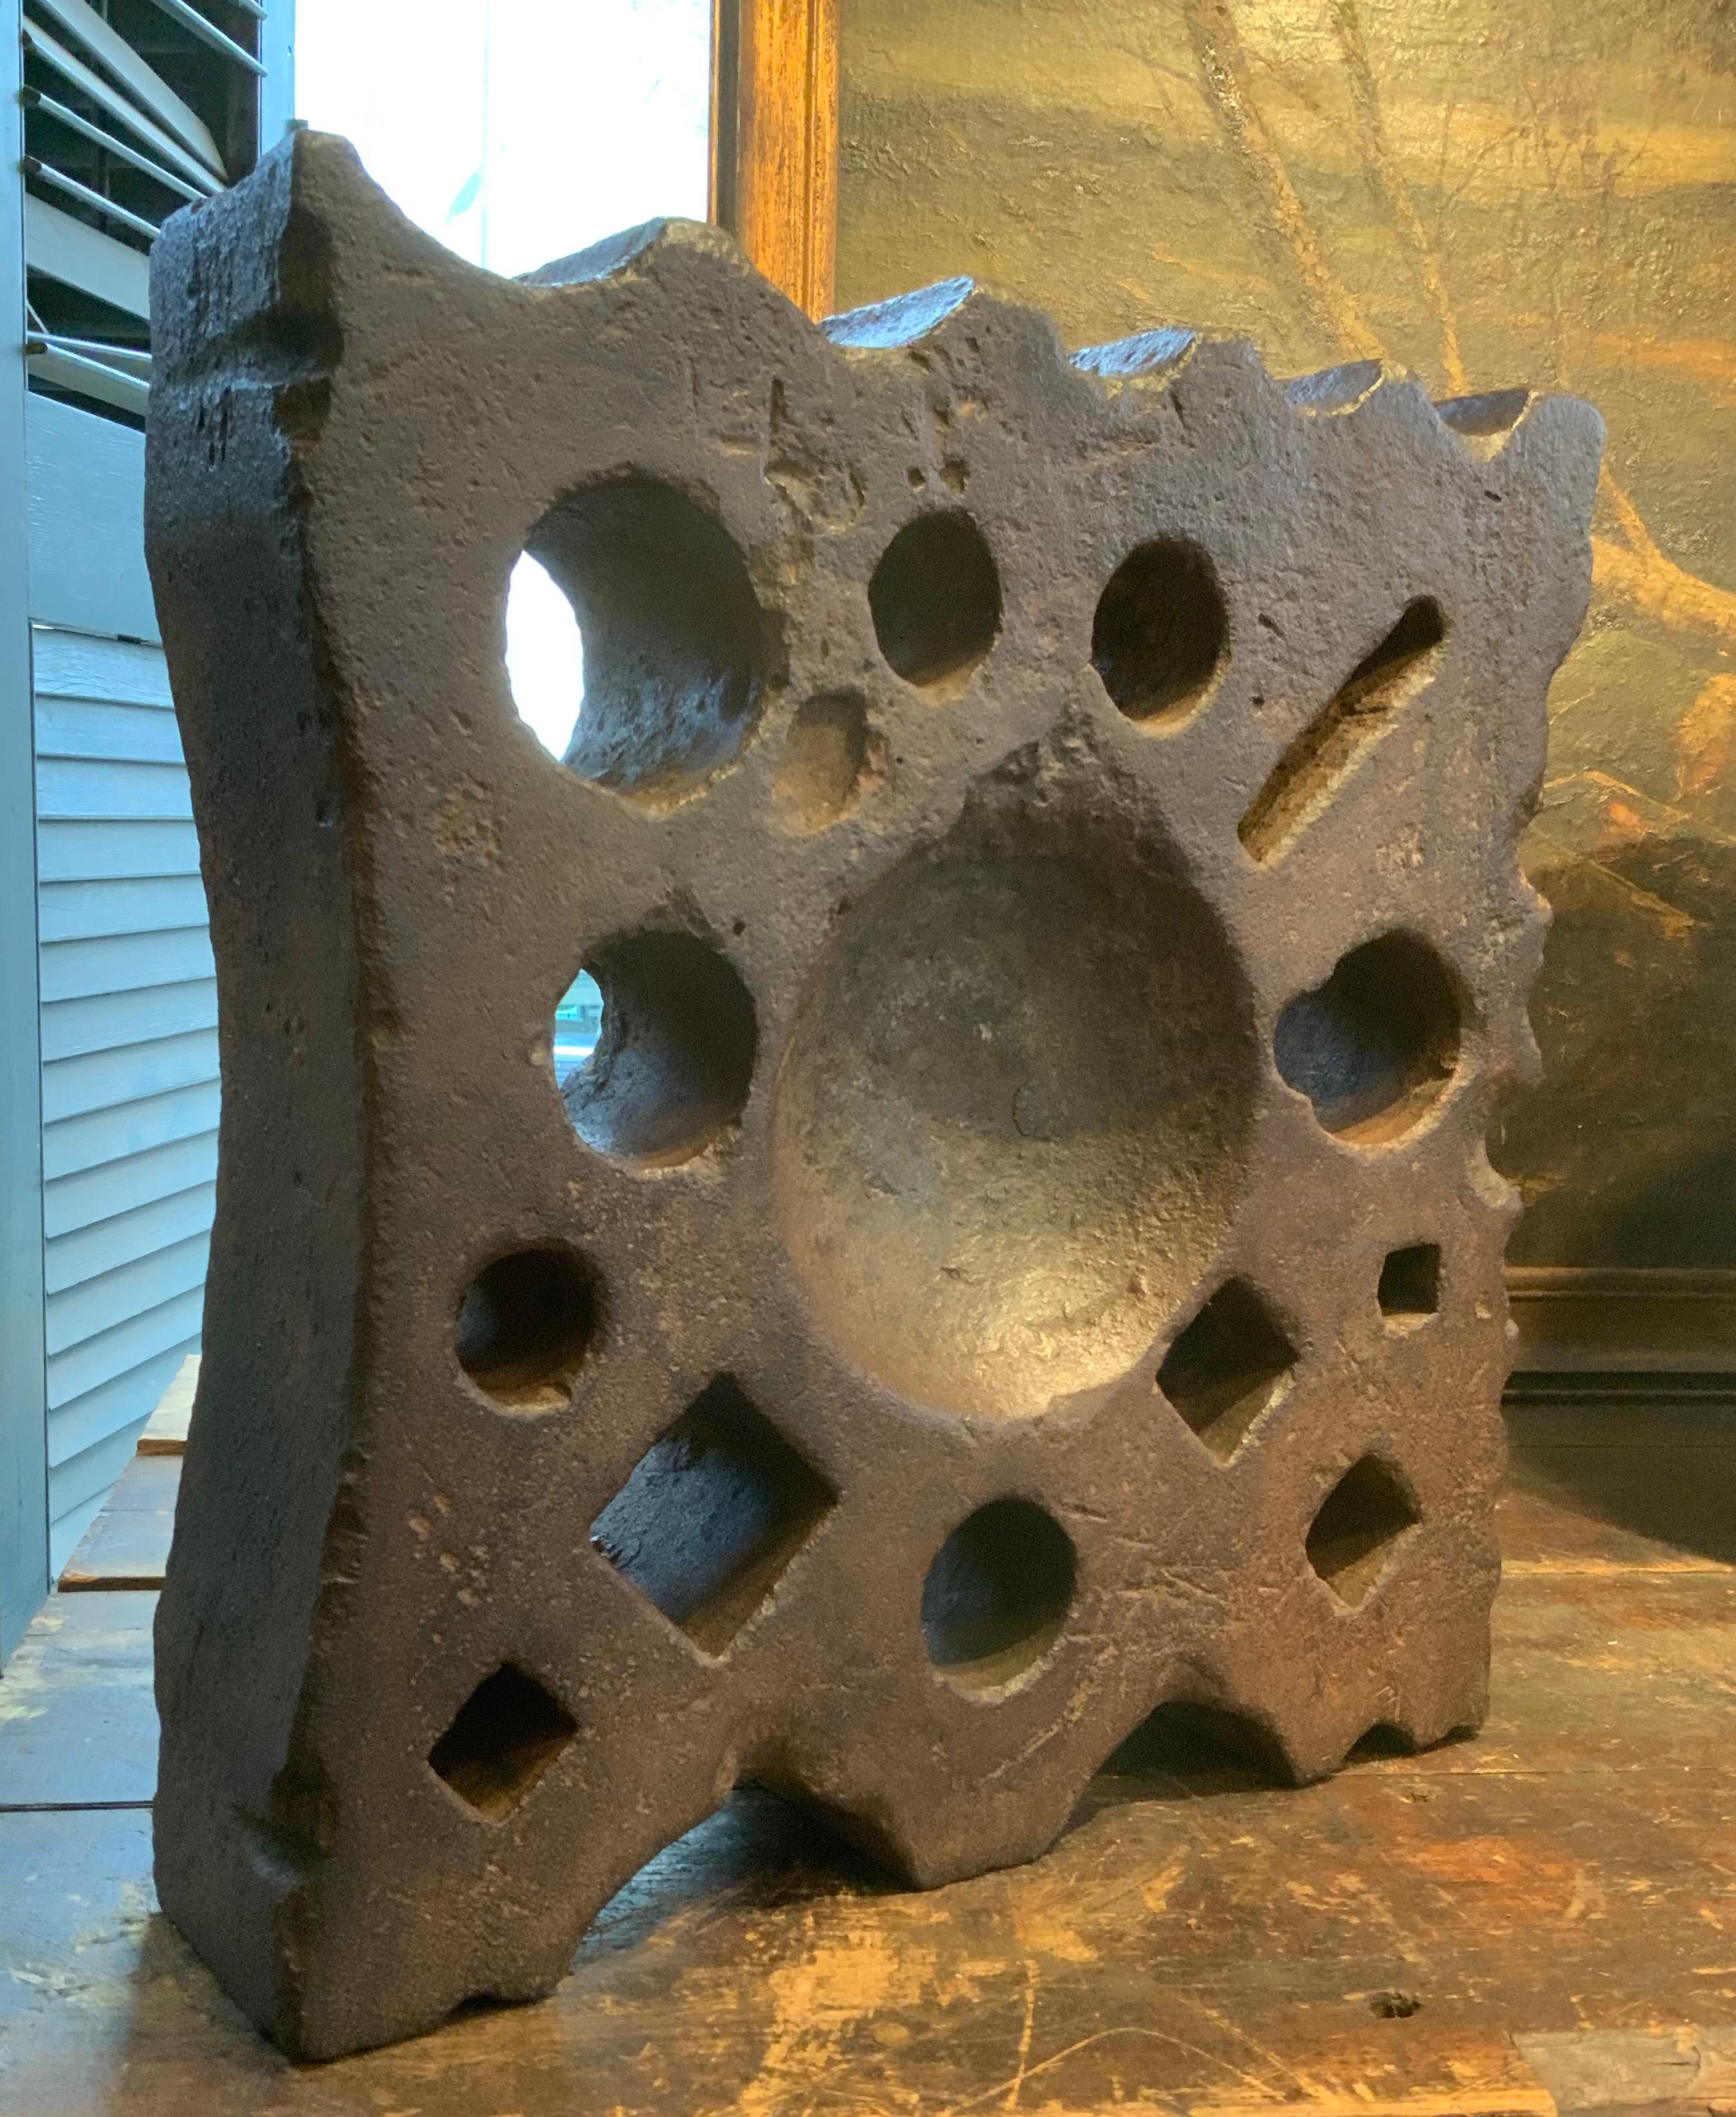 An amazing antique 19th century cast iron Swage Block. these stunning industrial age functional tools were used by blacksmiths and metal workers to bend and form steel of varying sizes and shapes, using the various holes and openings in the block,